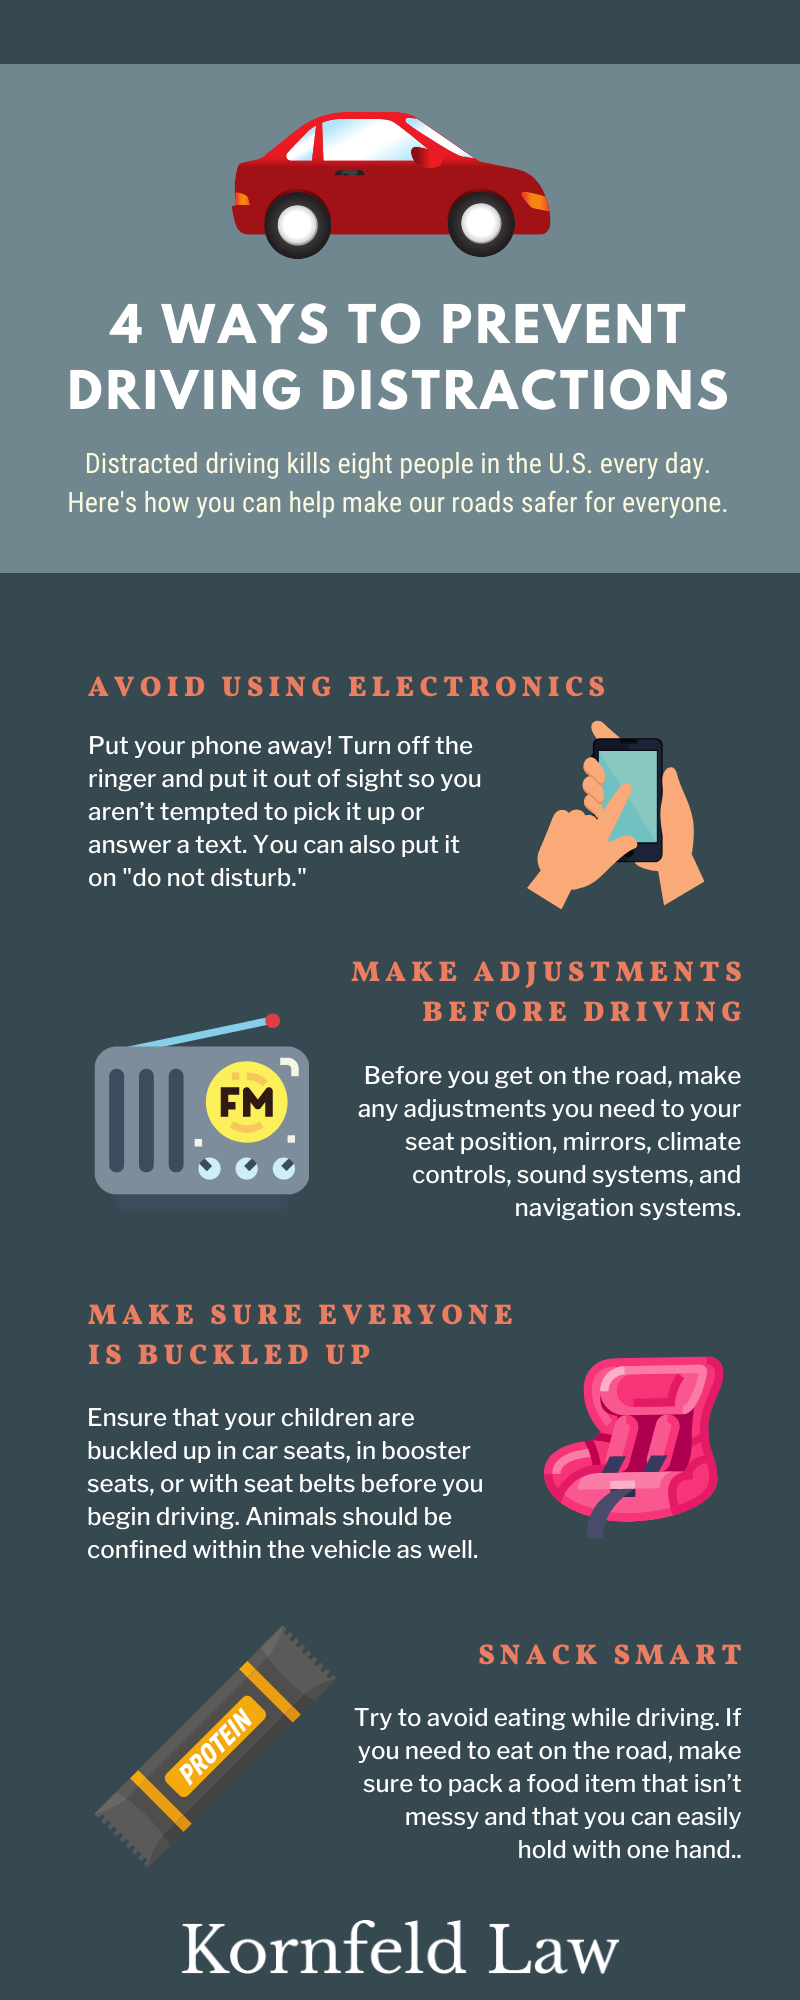 4 ways to prevent driving distractions